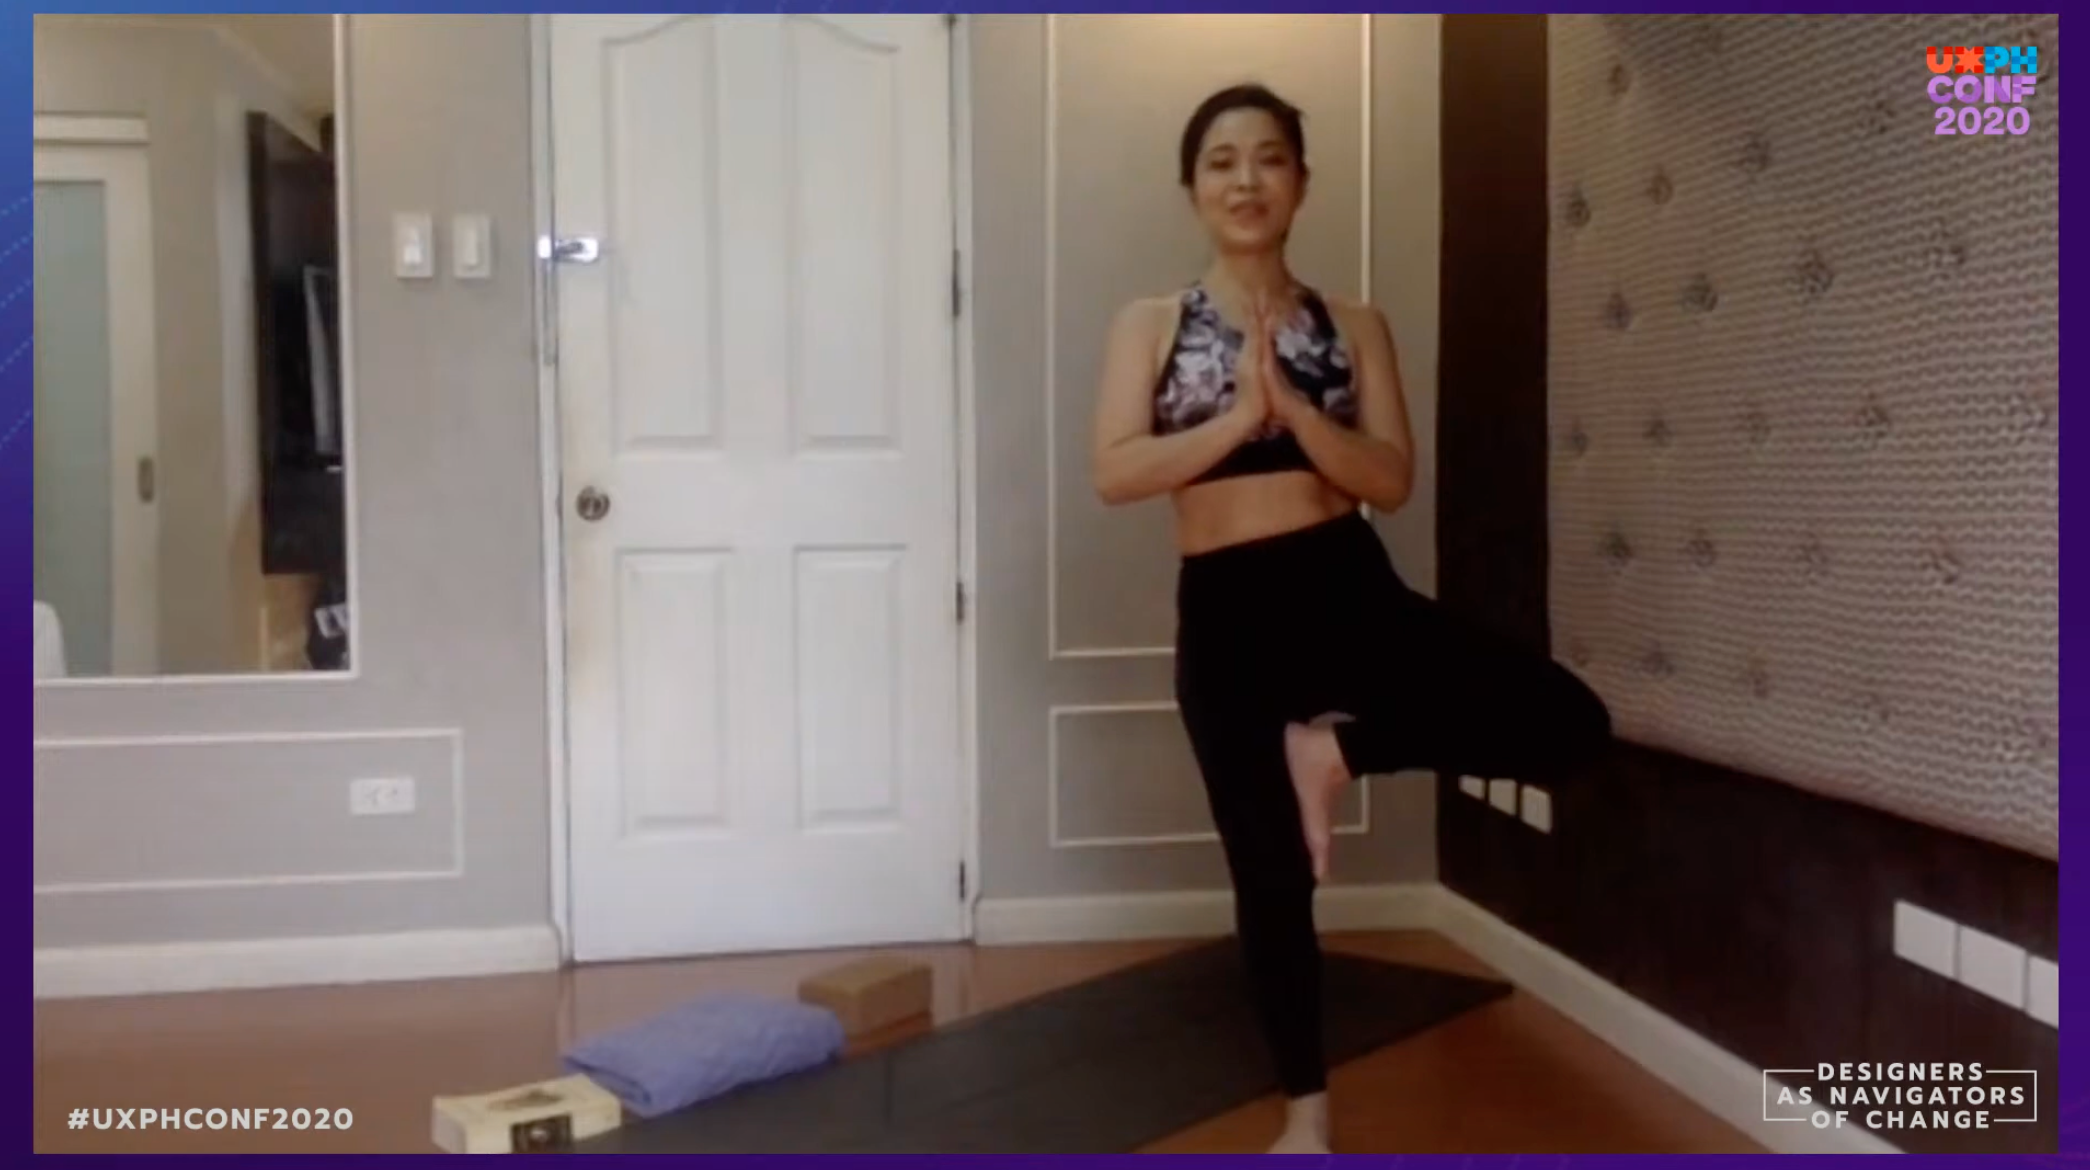 Morning yoga session with Ivy Lopez